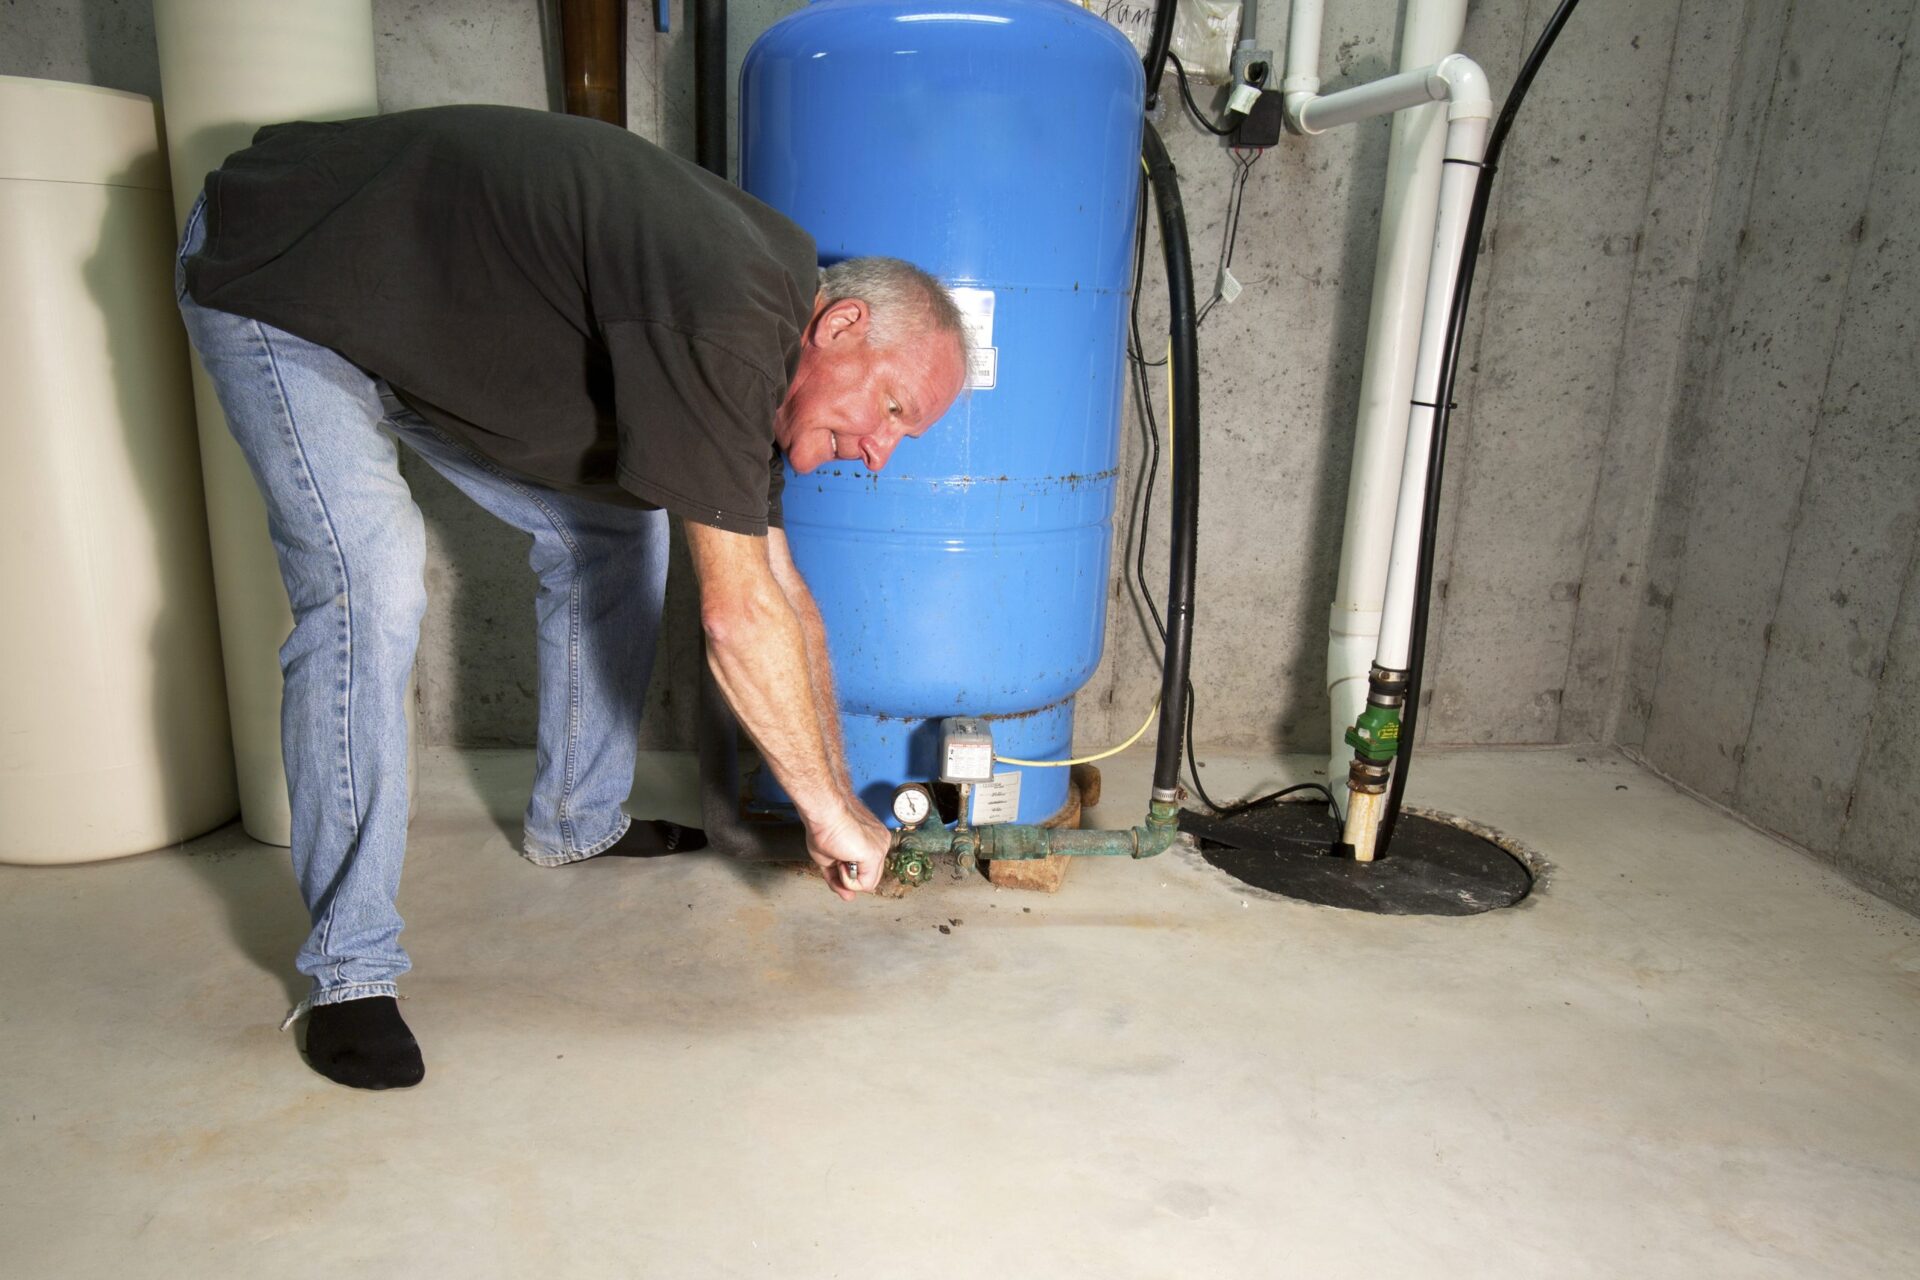 Man with angry, red face bent over sump pump with a wrench